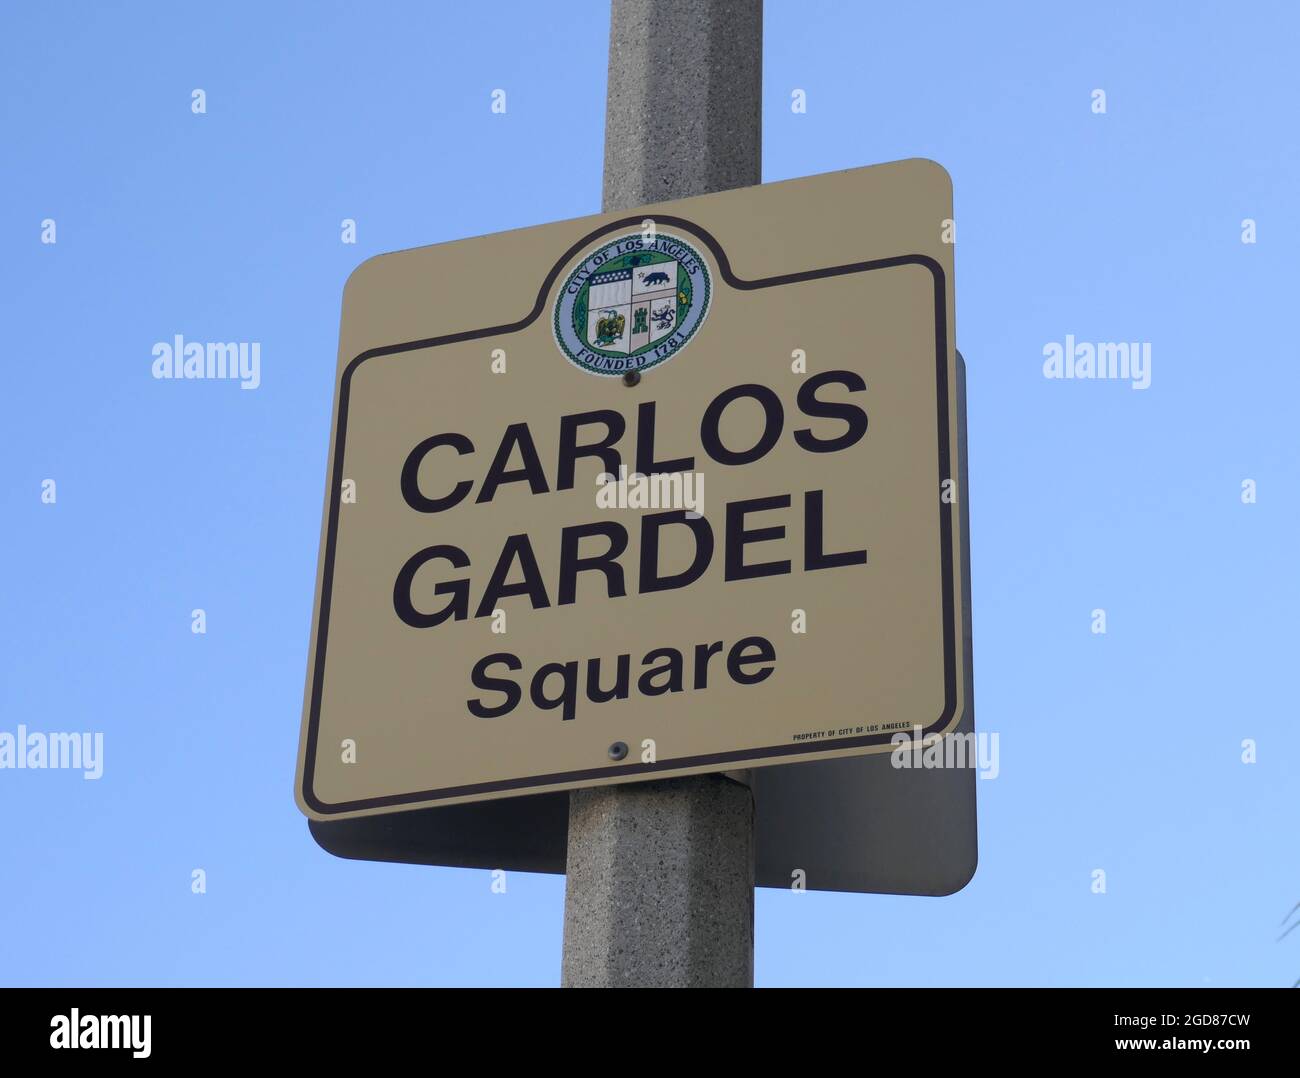 Los Angeles, California, USA 10th August 2021 A general view of atmosphere of Carlos Gardel Square Sign on August 10, 2021 in Los Angeles, California, USA. Photo by Barry King/Alamy Stock Photo Stock Photo